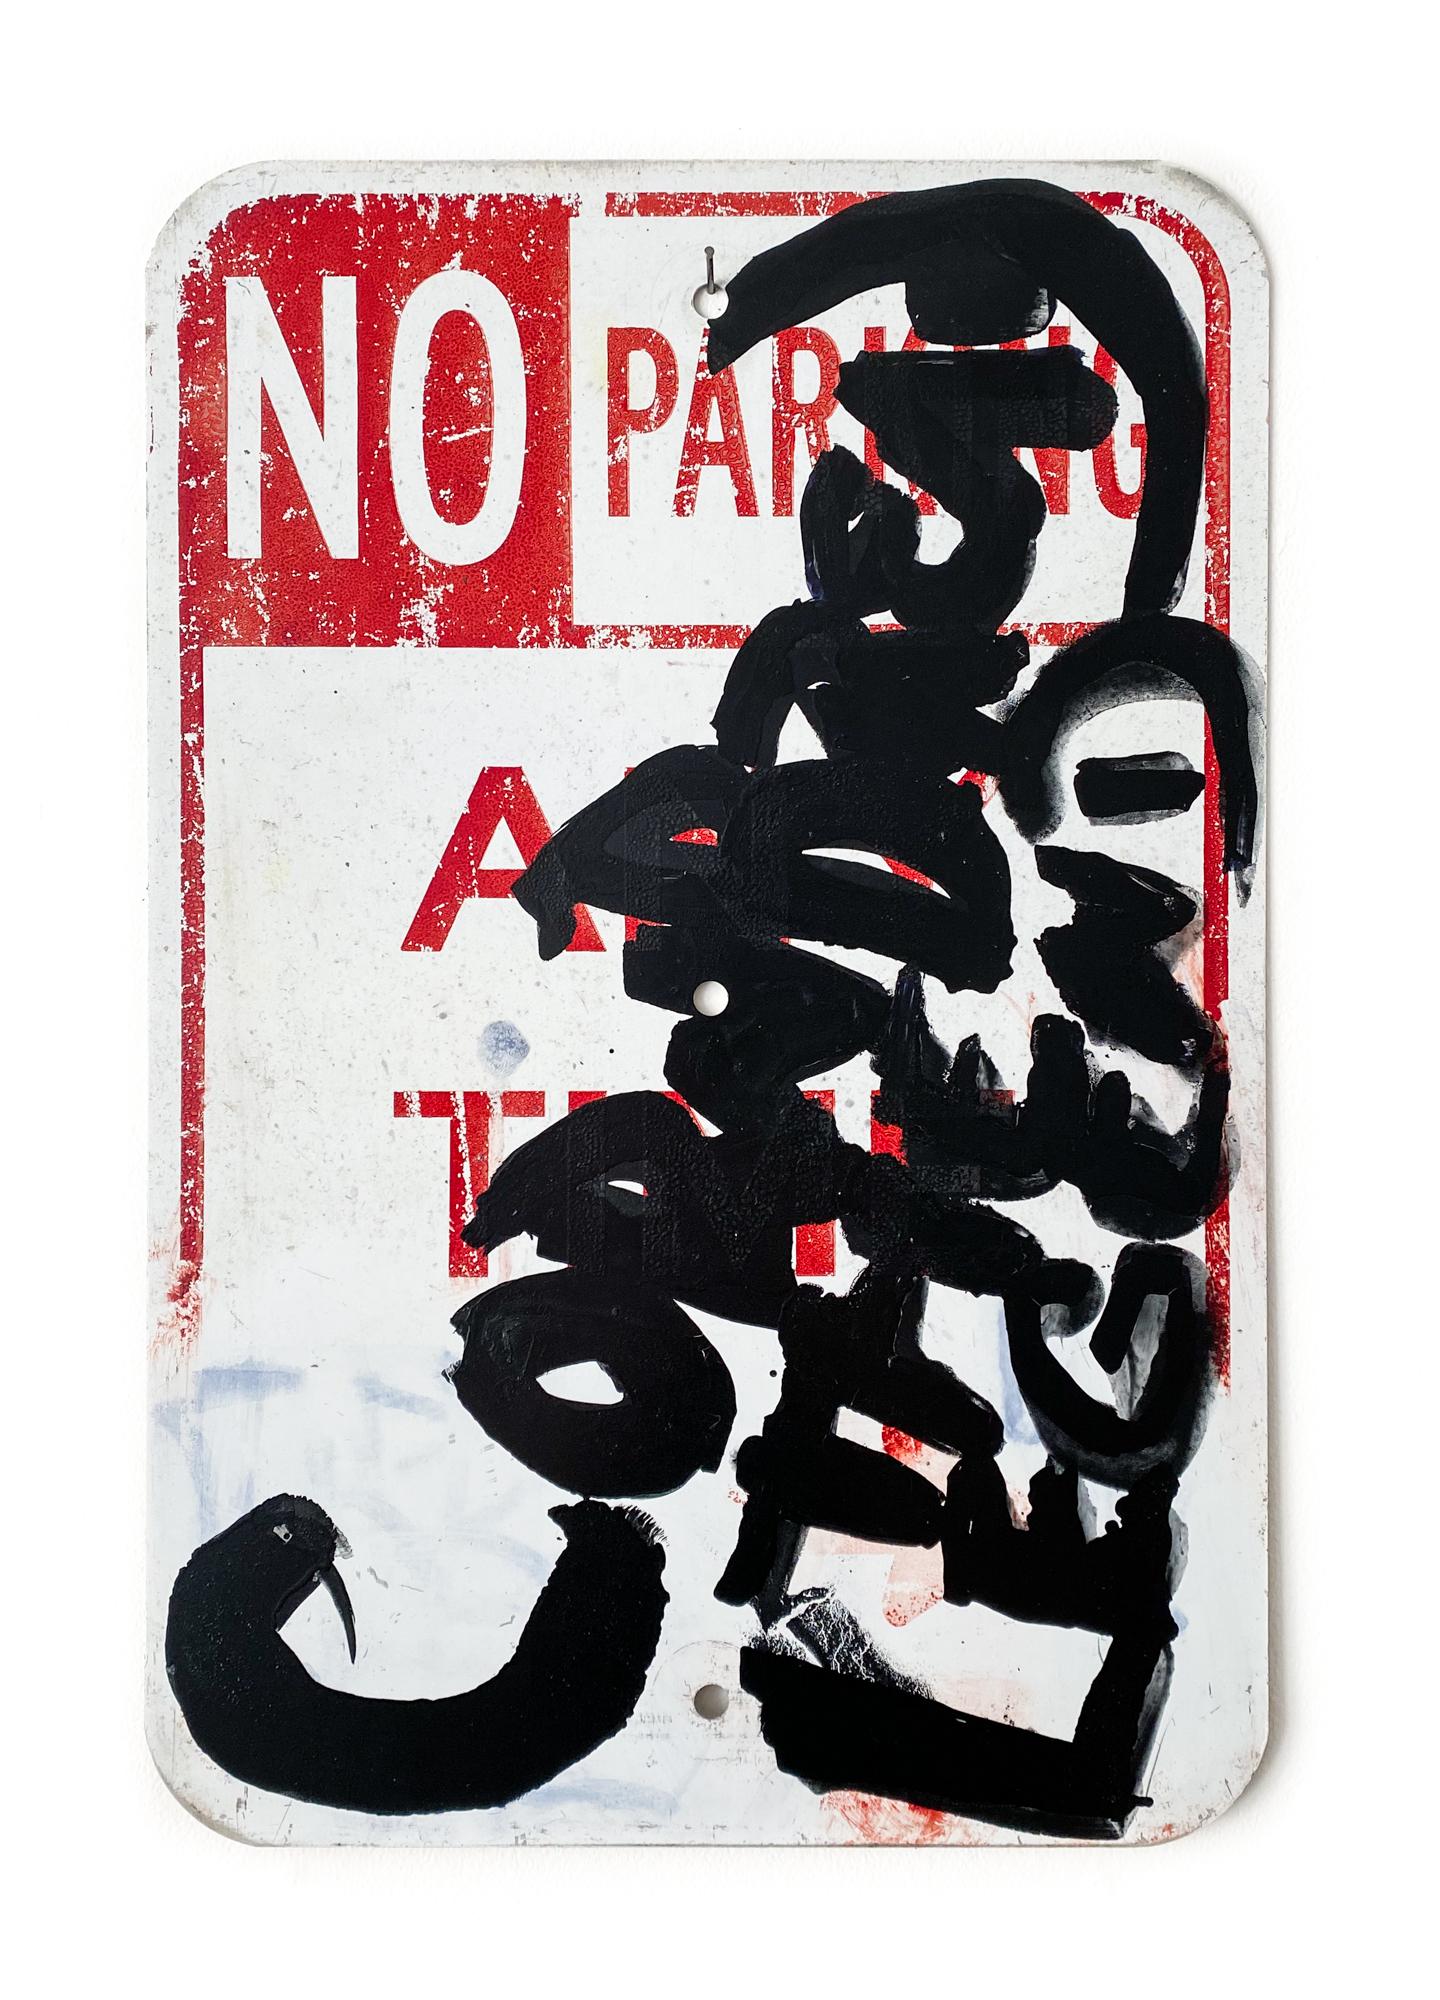 This red, black, and white artwork titled "Cornbread The Legend No Parking" is an original artwork by Cornbread made of acrylic paint on a retired street sign. It measures 18"h x 12"w.

Darryl McCray, known by his tagging name, “Cornbread,” is a